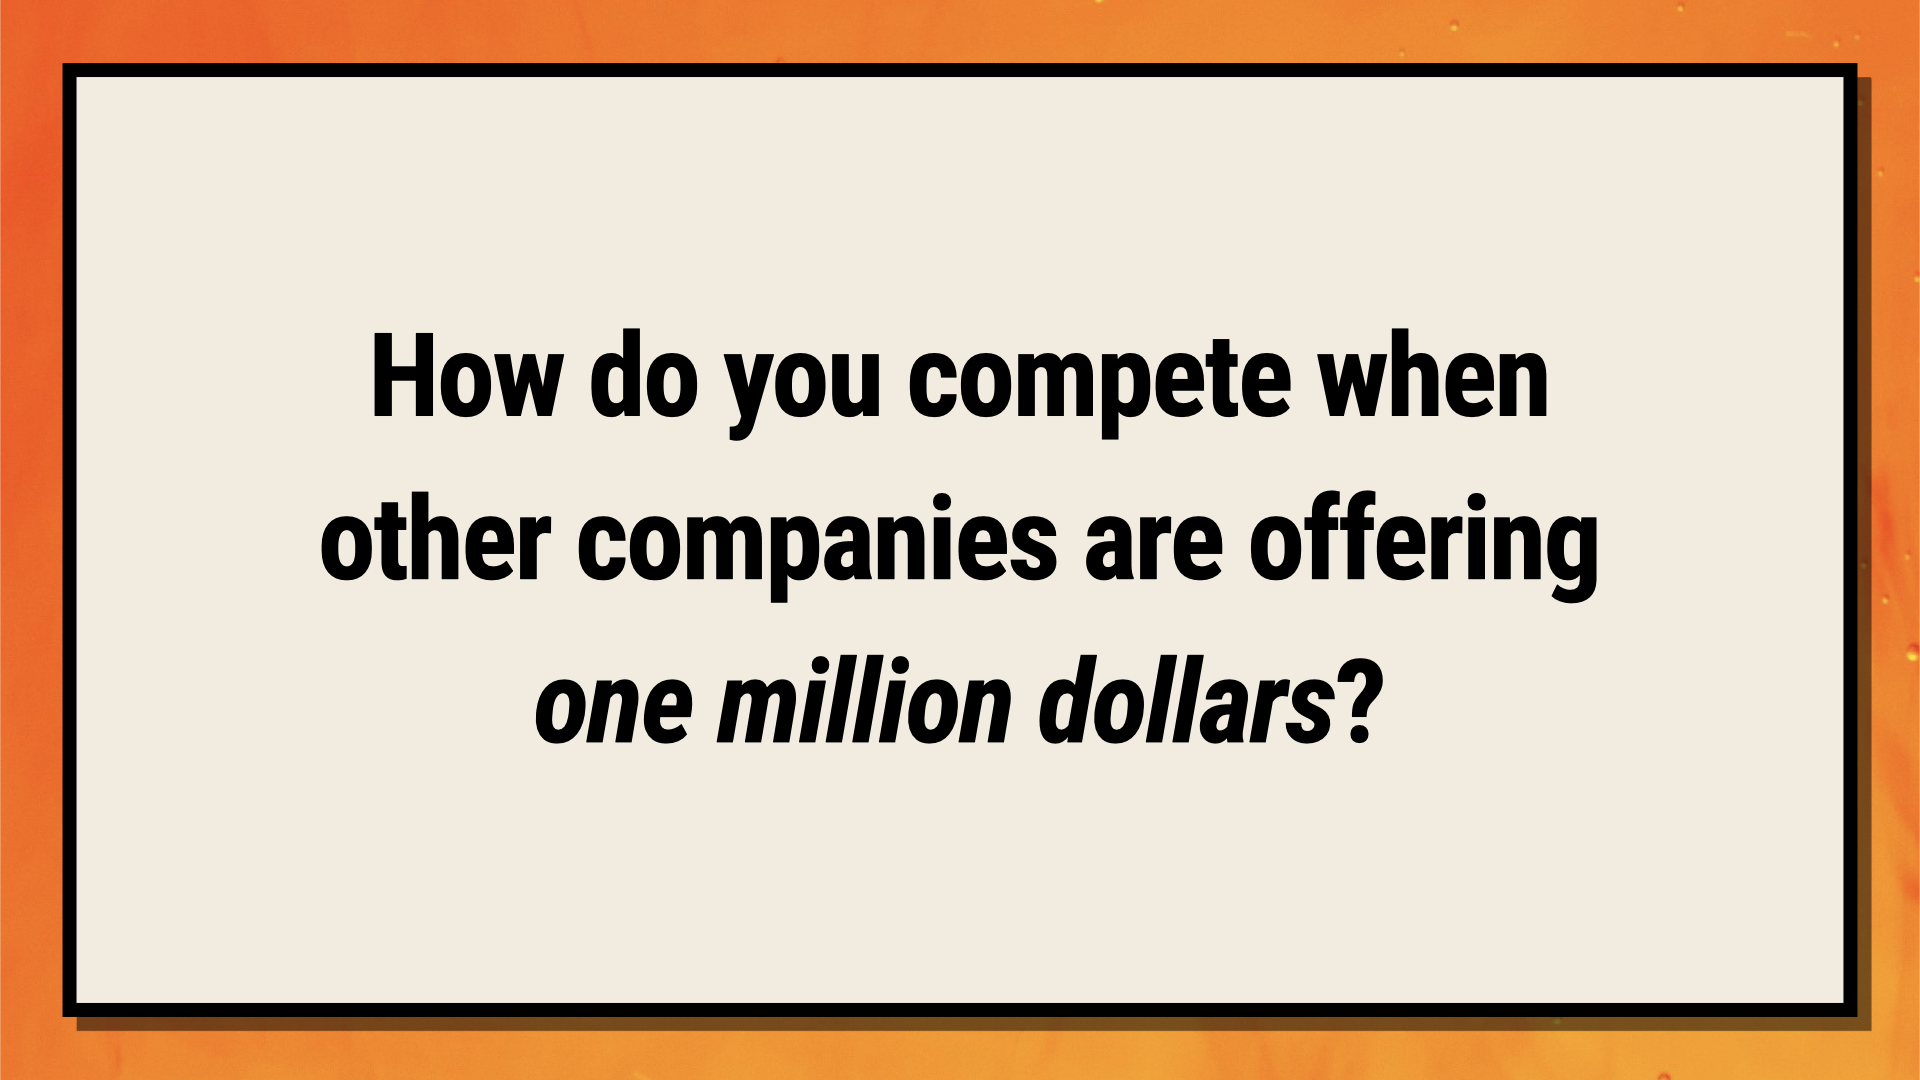 How do you compete when other companies are offering one million dollars?